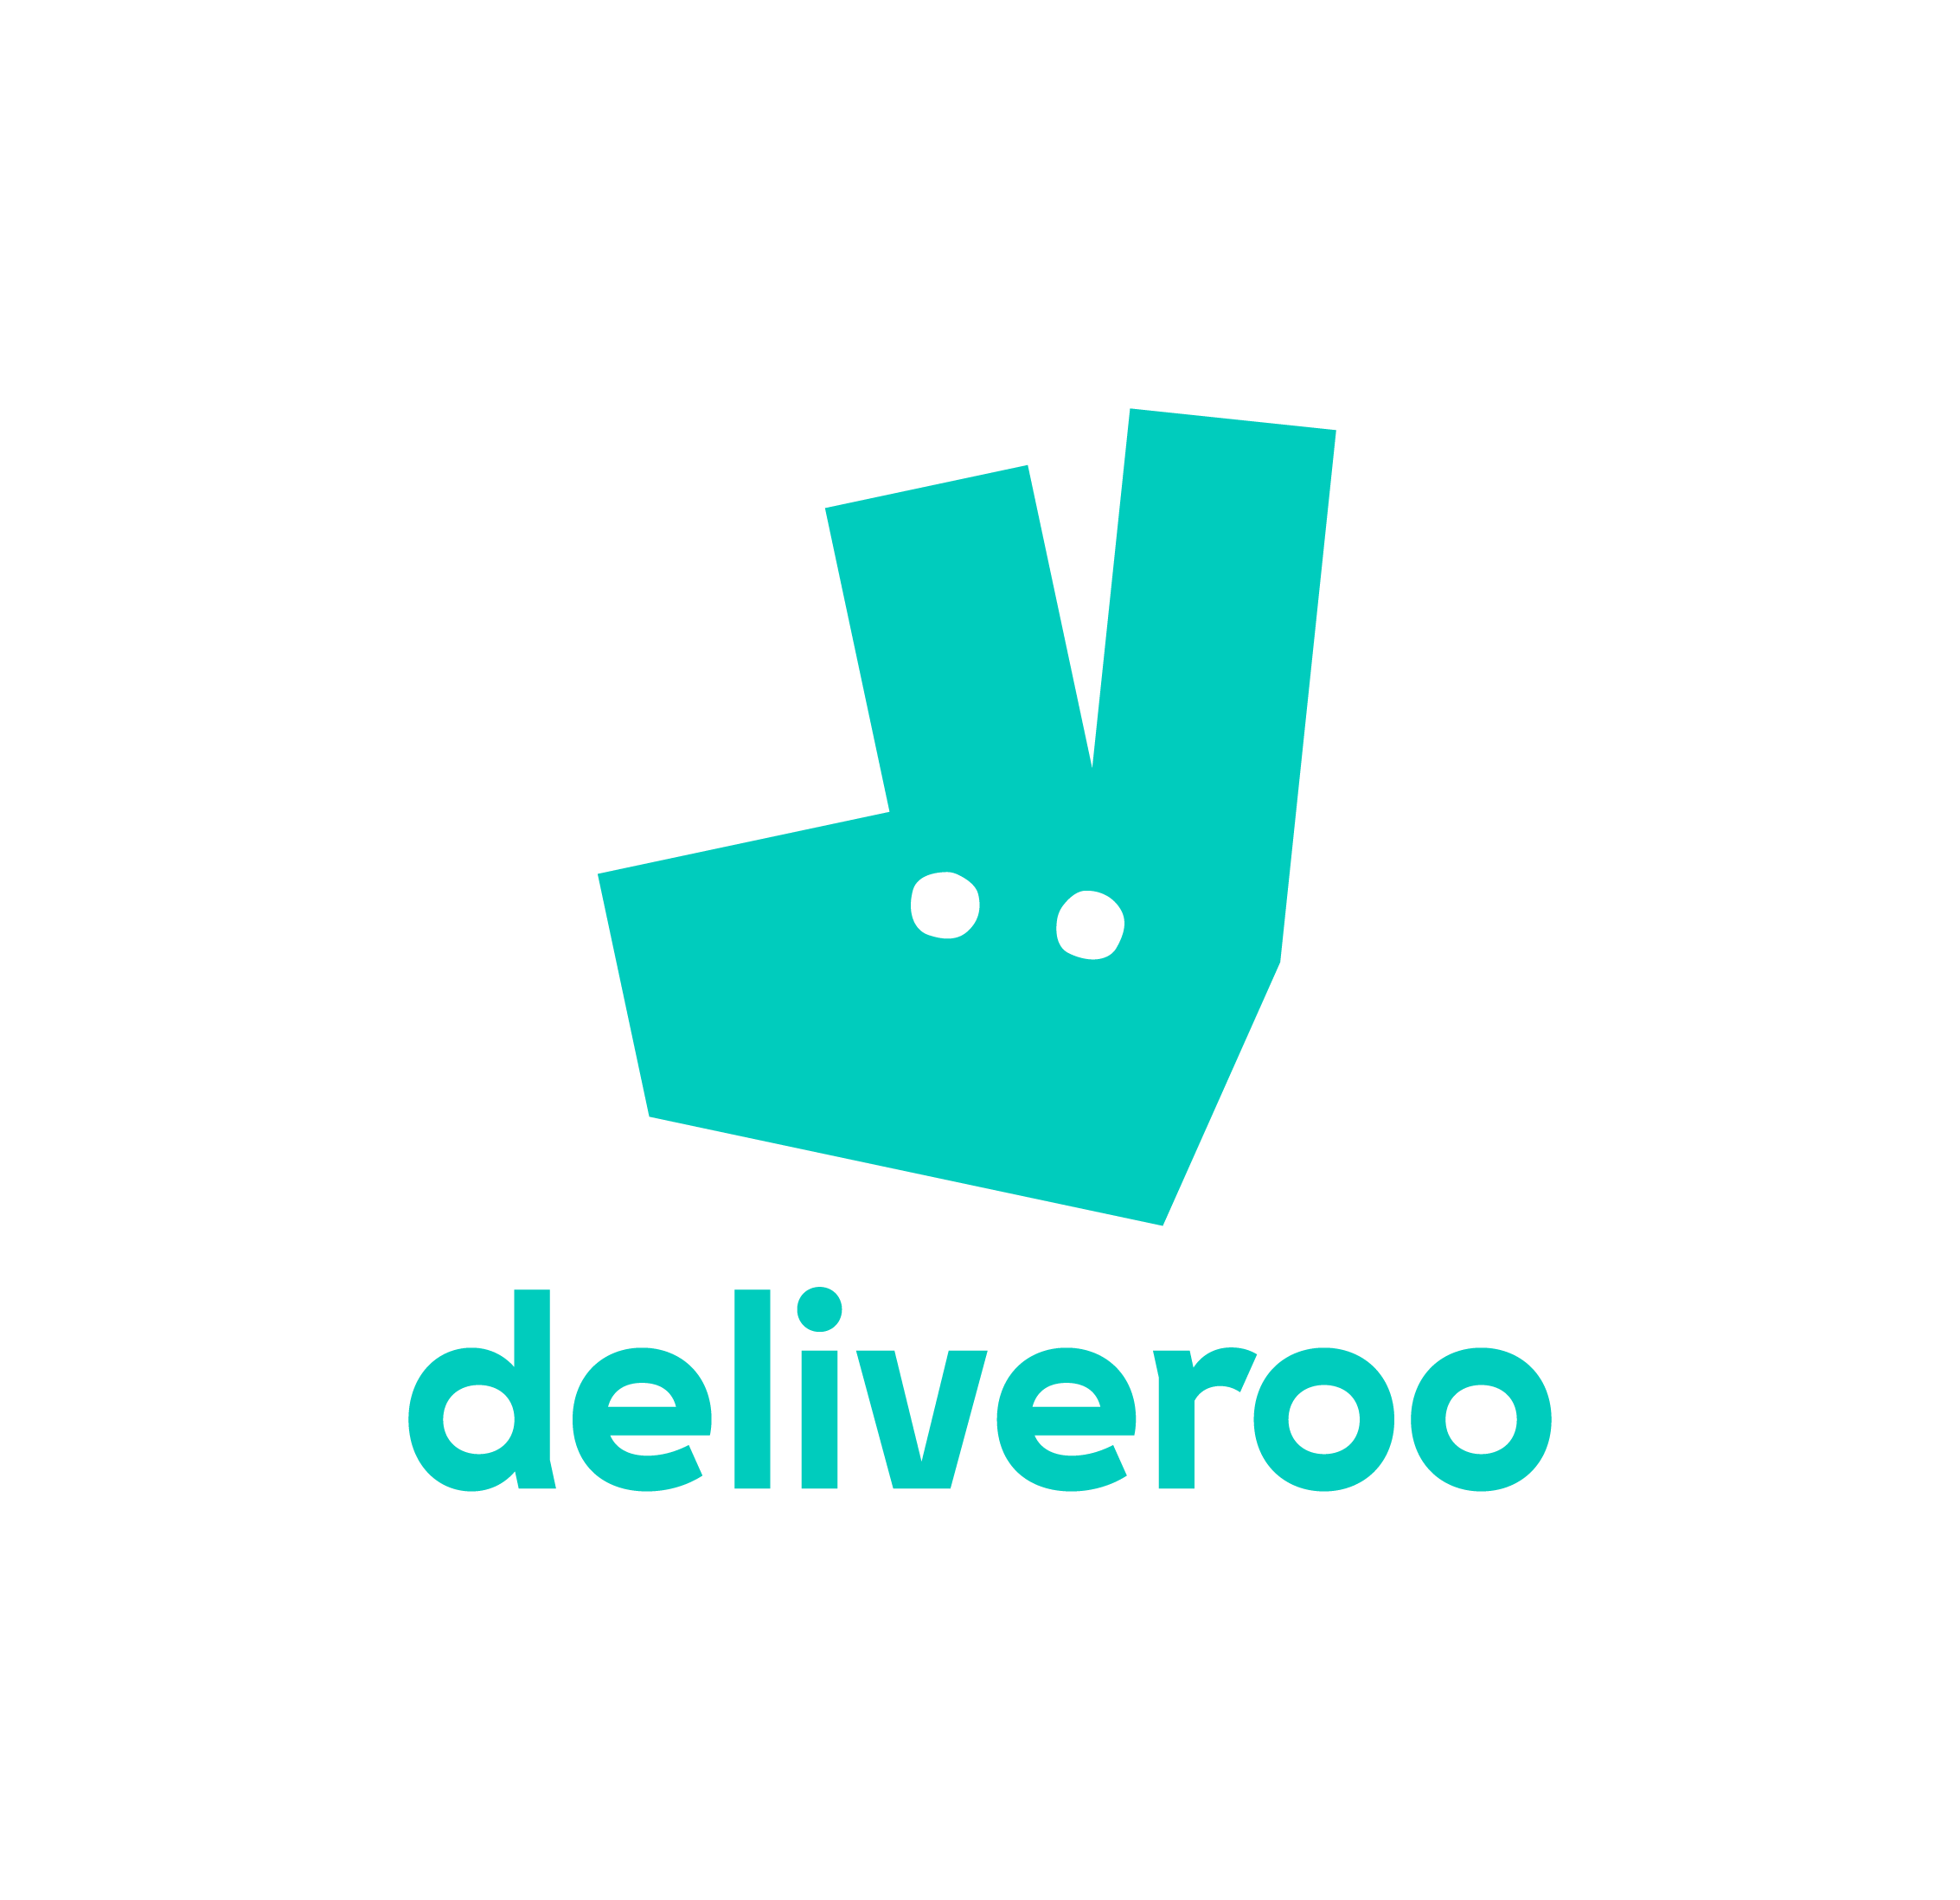 Chesterfield Deliveroo